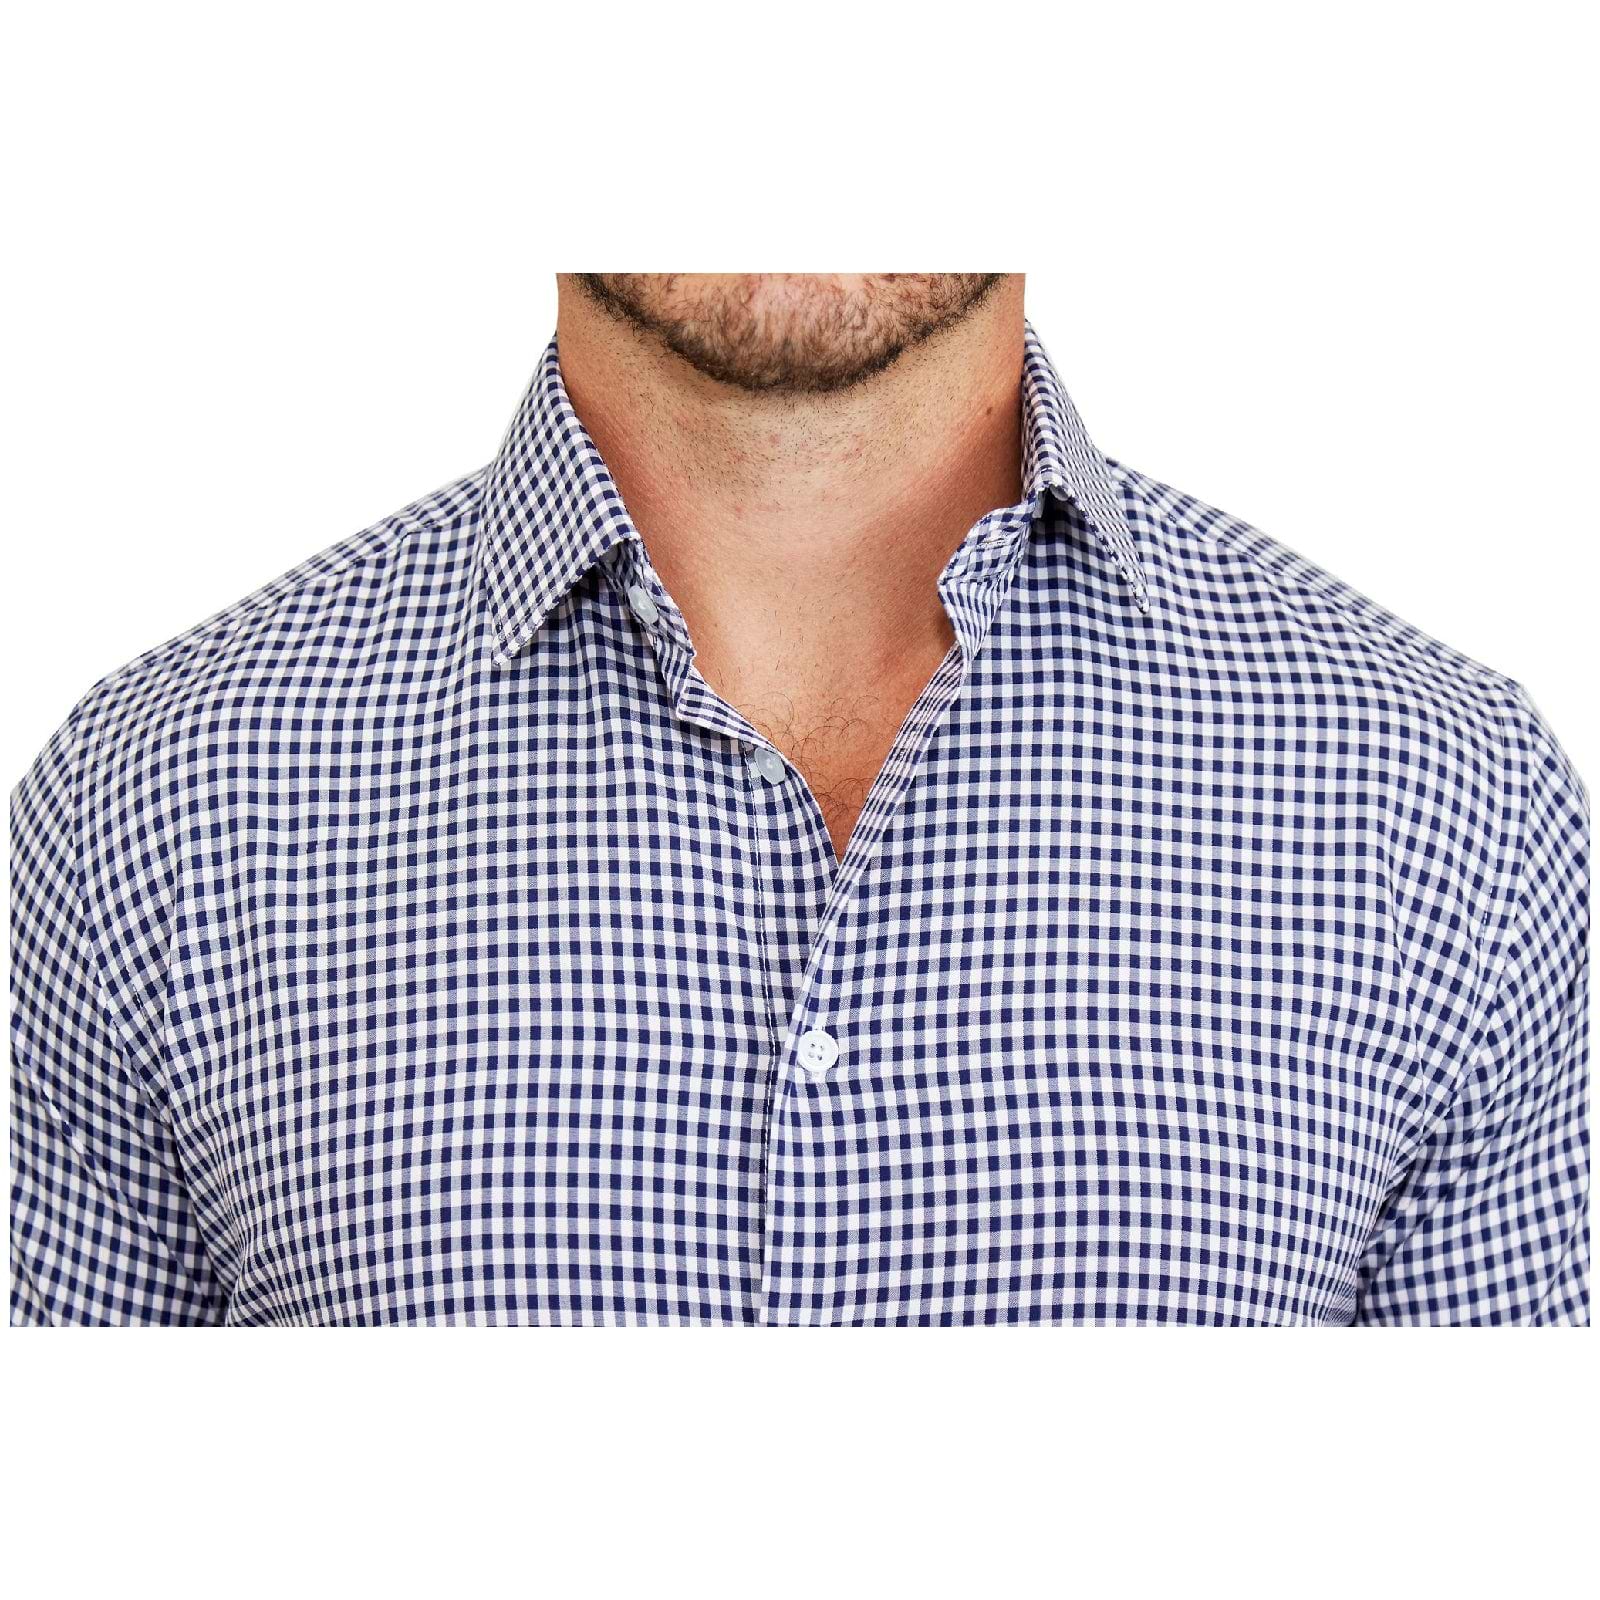 "The Rooney" Navy Gingham